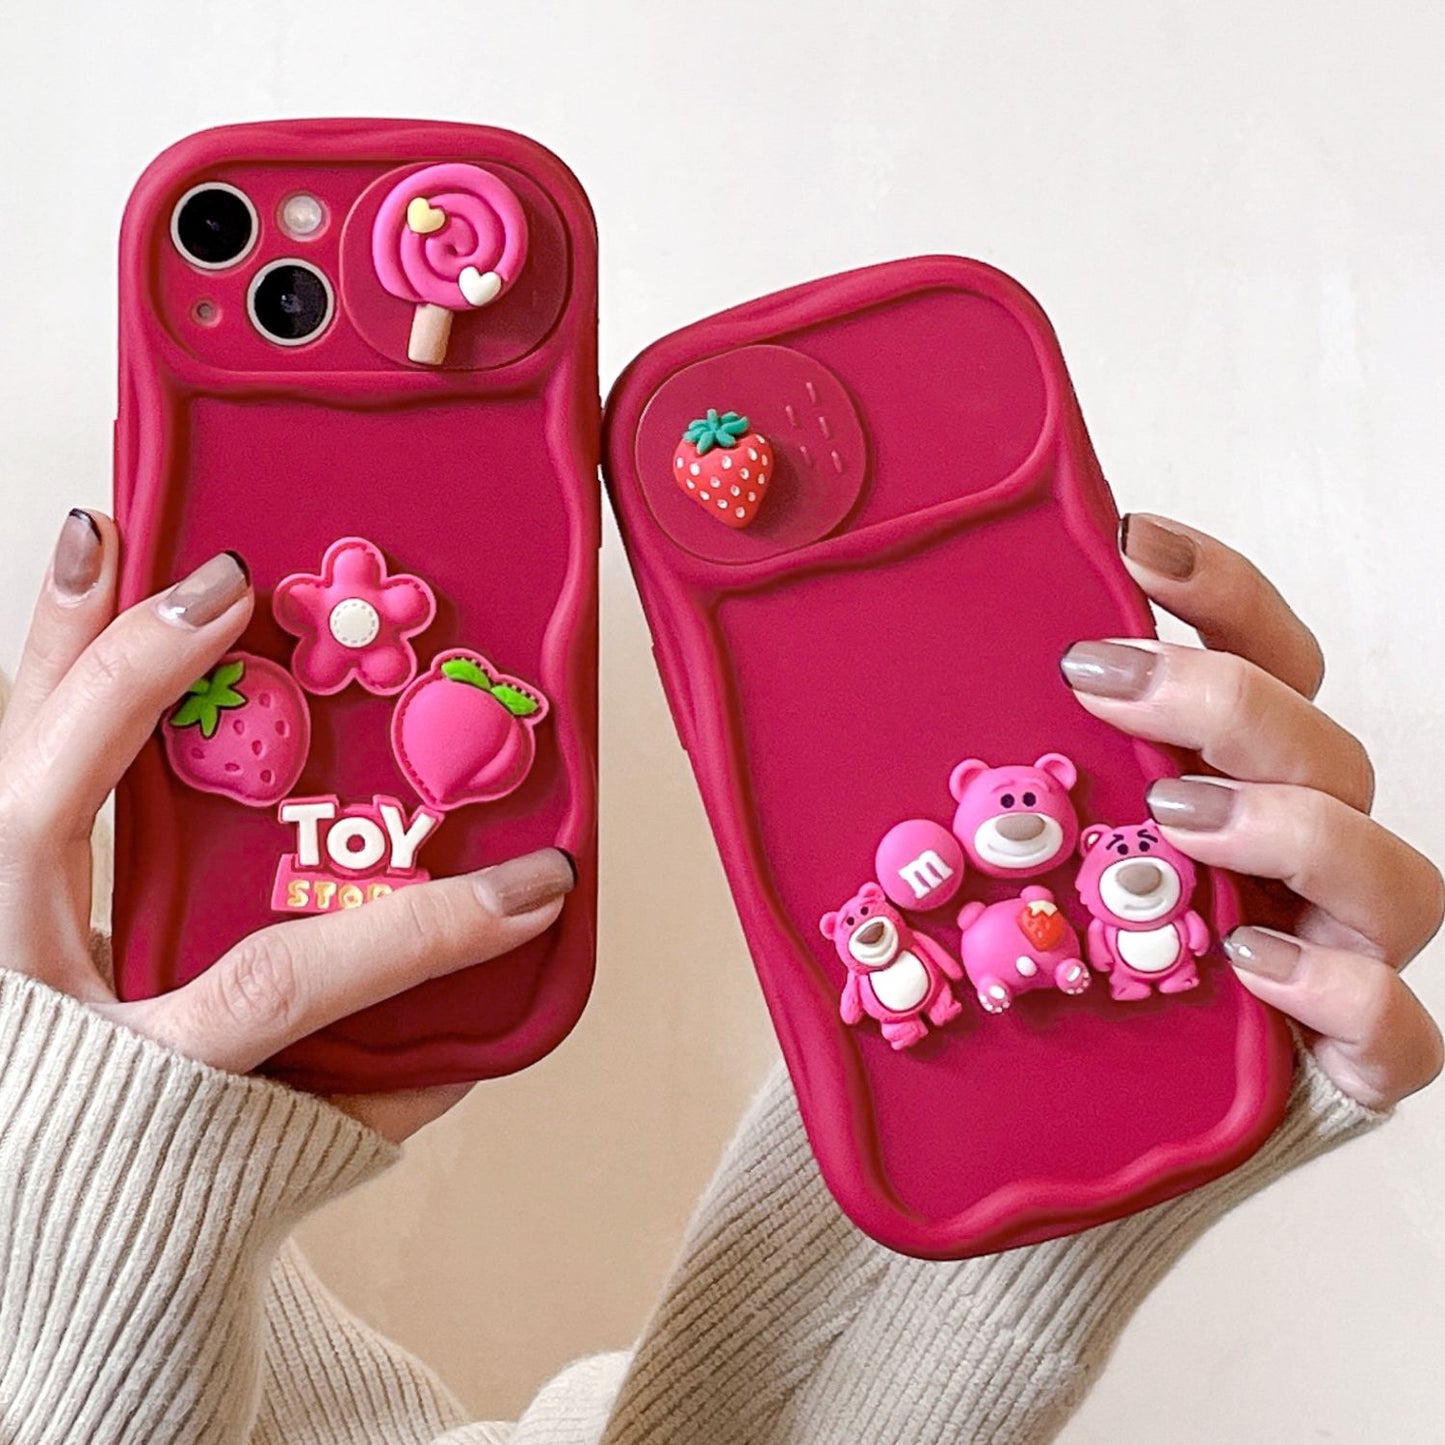 Strawberry Delight Toy Case - iPhone